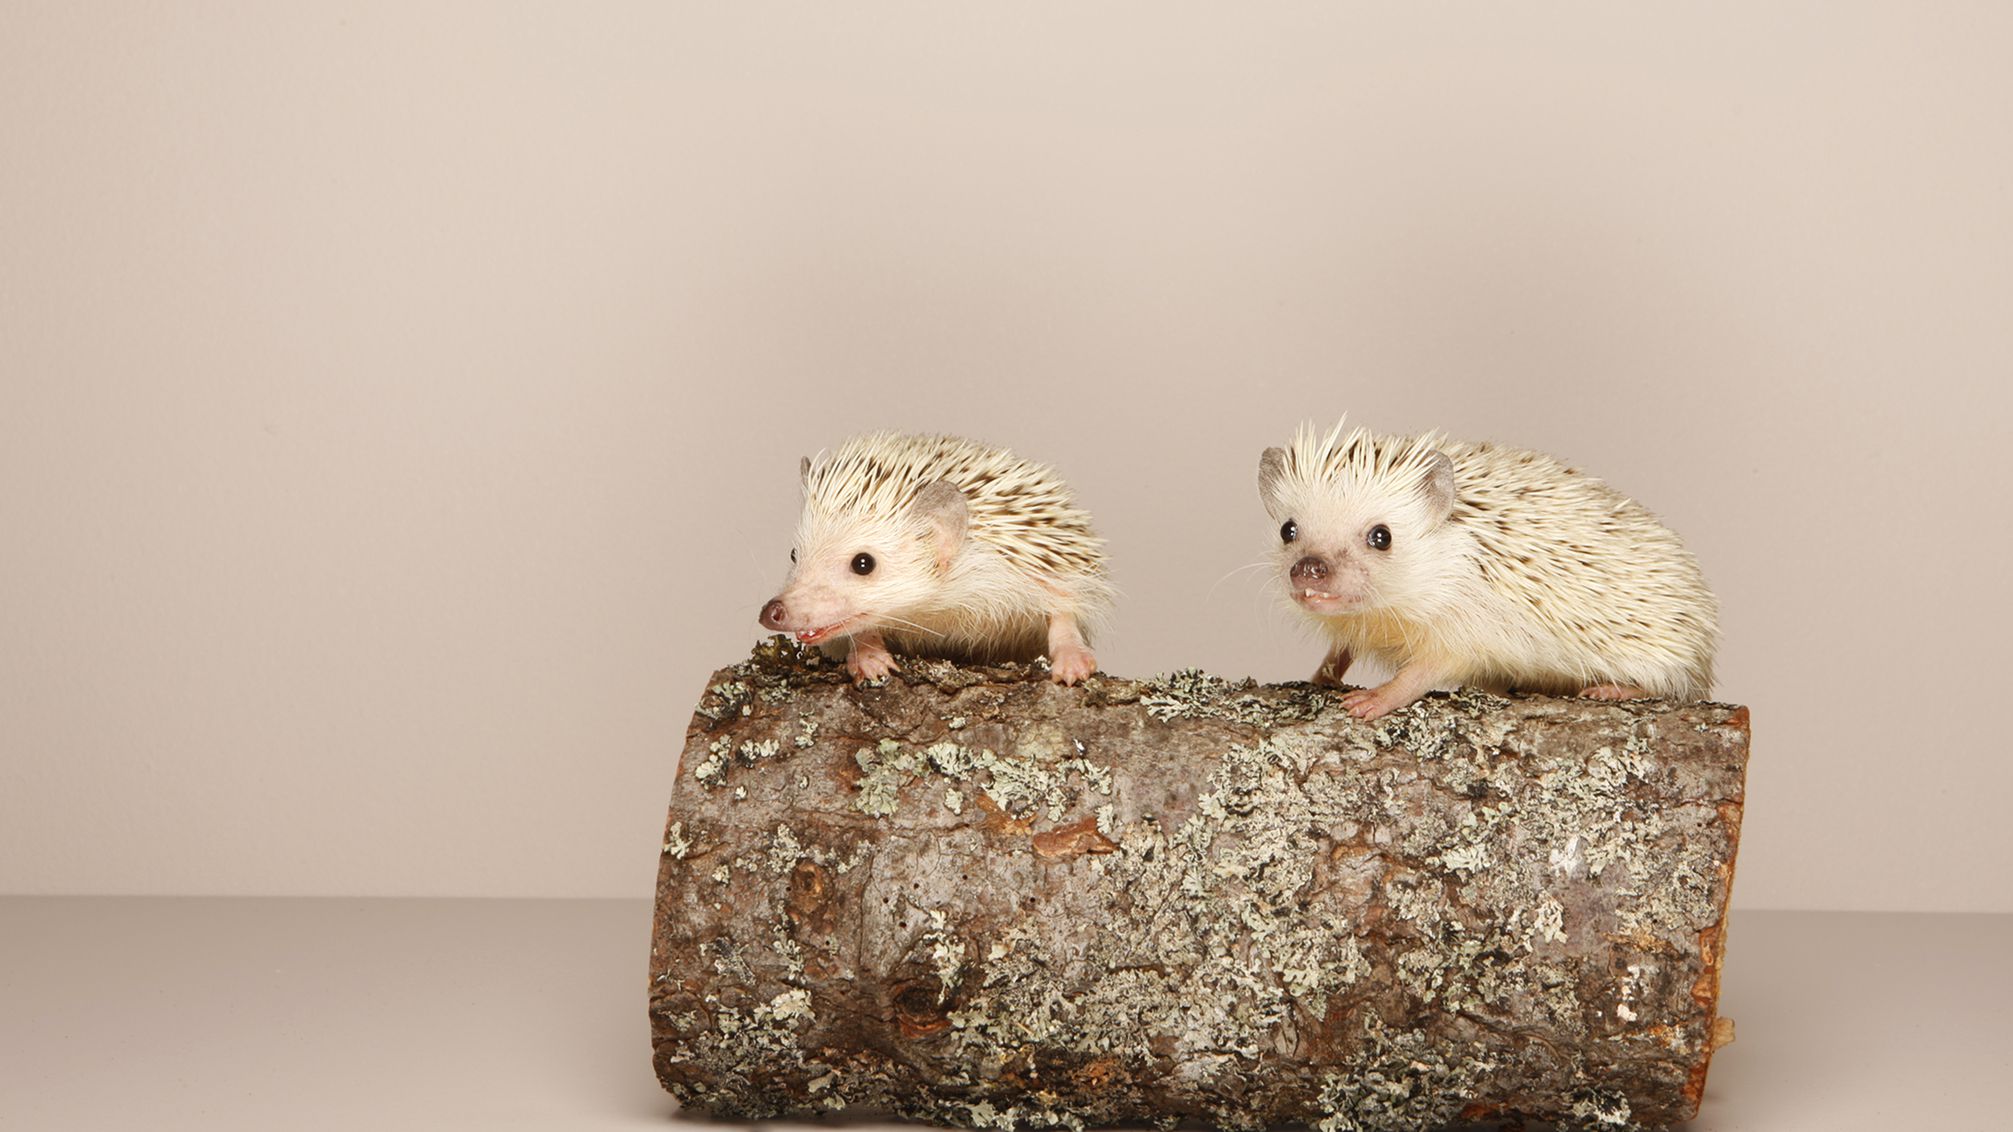 Can you put 2 hedgehogs together?